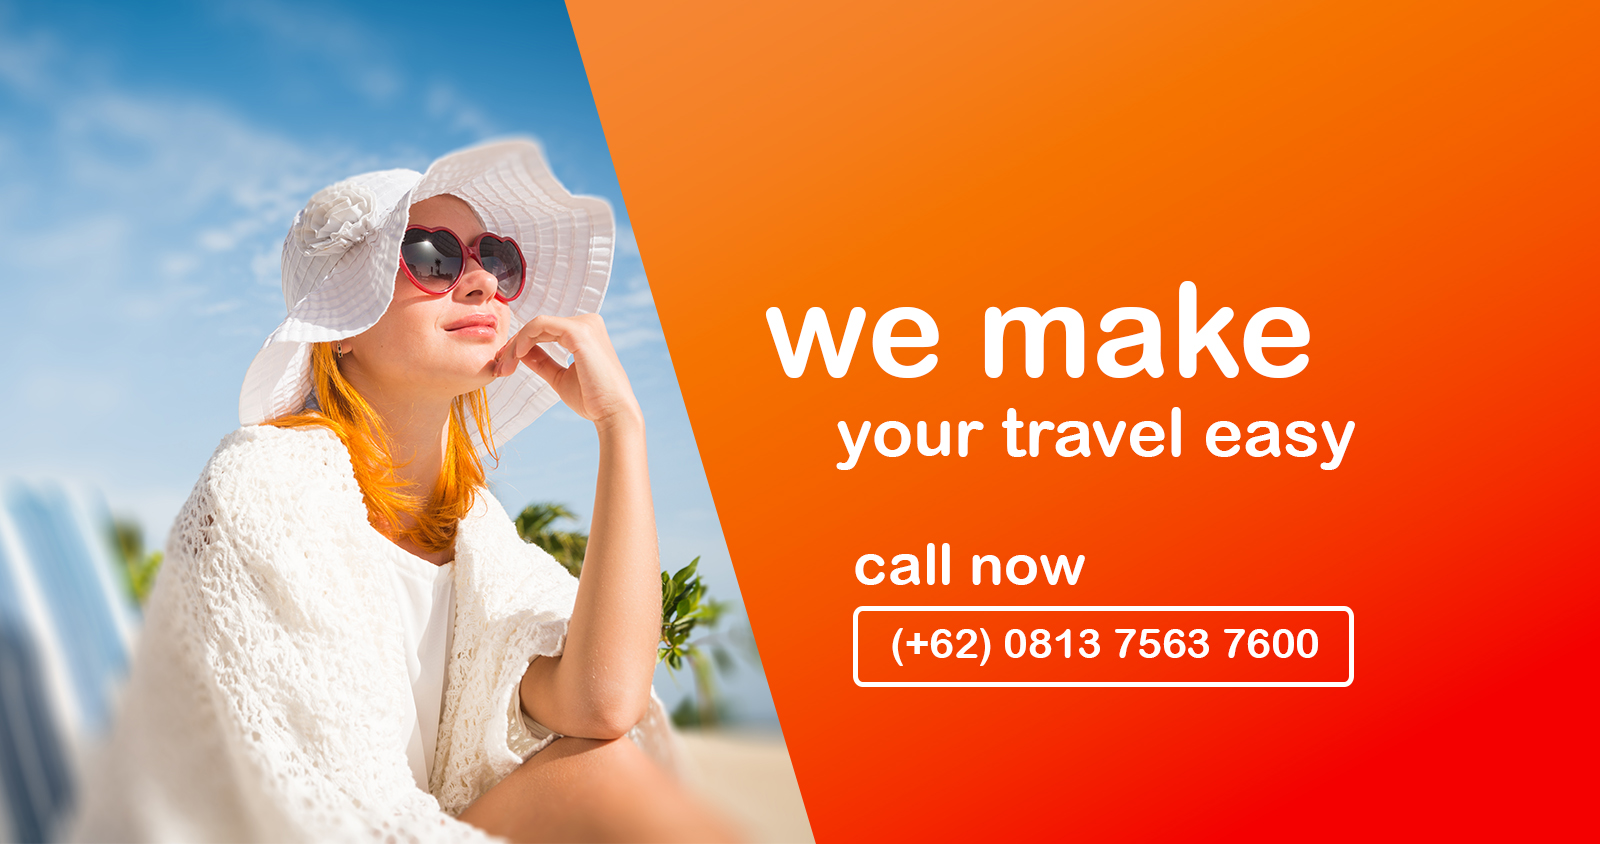 = oR { we make

your travel easy

call now

(+62) 0813 7563 7600